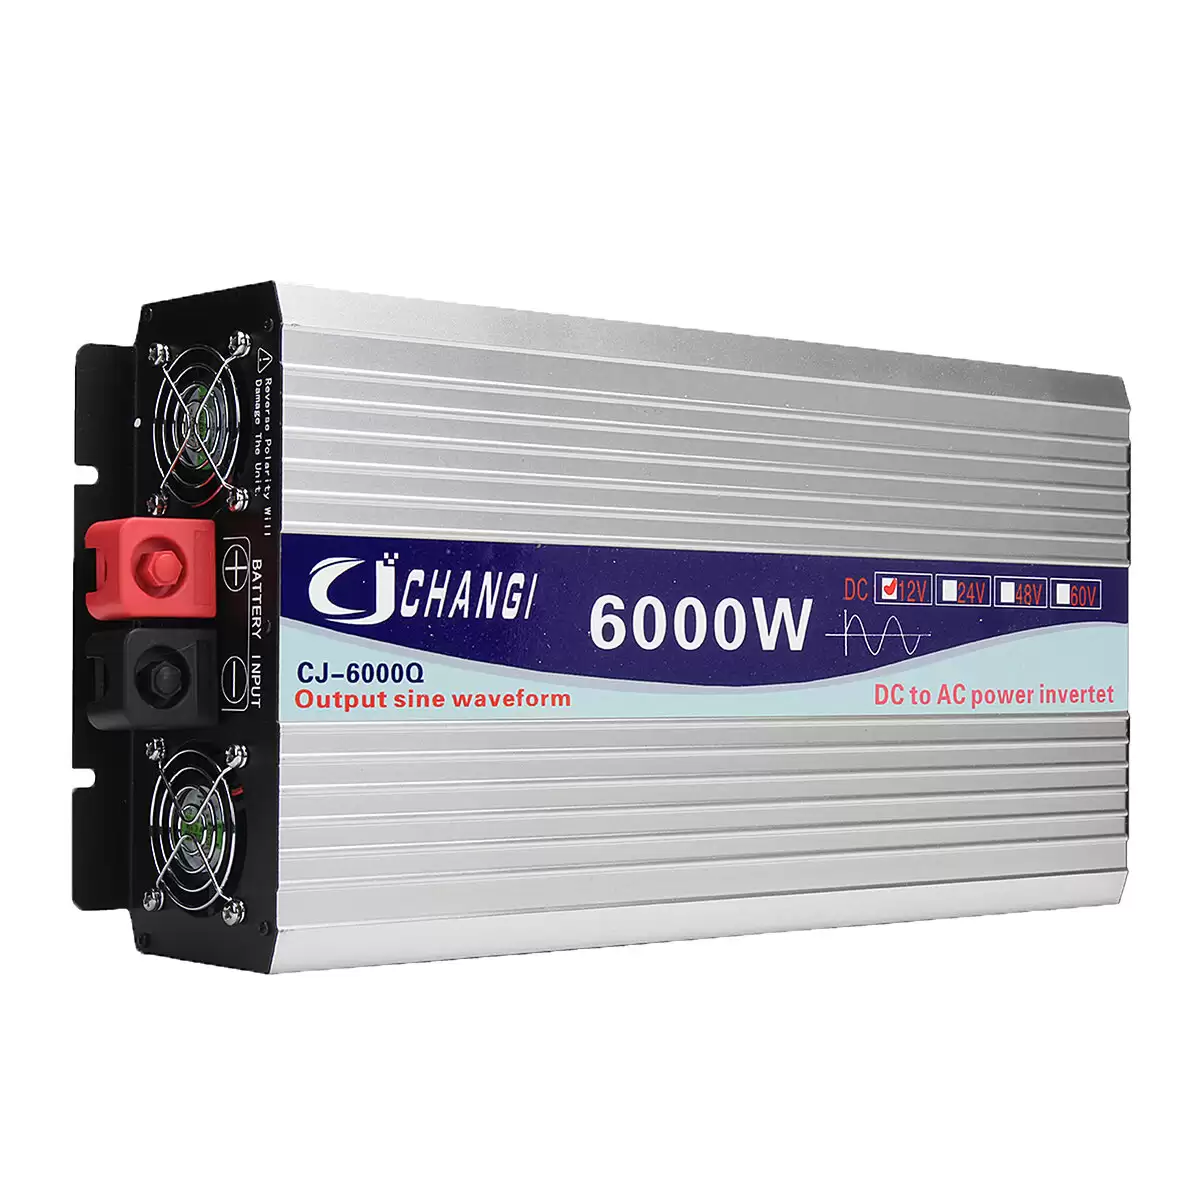 Order In Just $80.33 35% Off For Intelligent Screen Pure Sine Wave Power Inverter 12v/24v To 220v 3000w/4000w/5000w/6000w Converter With This Coupon At Banggood